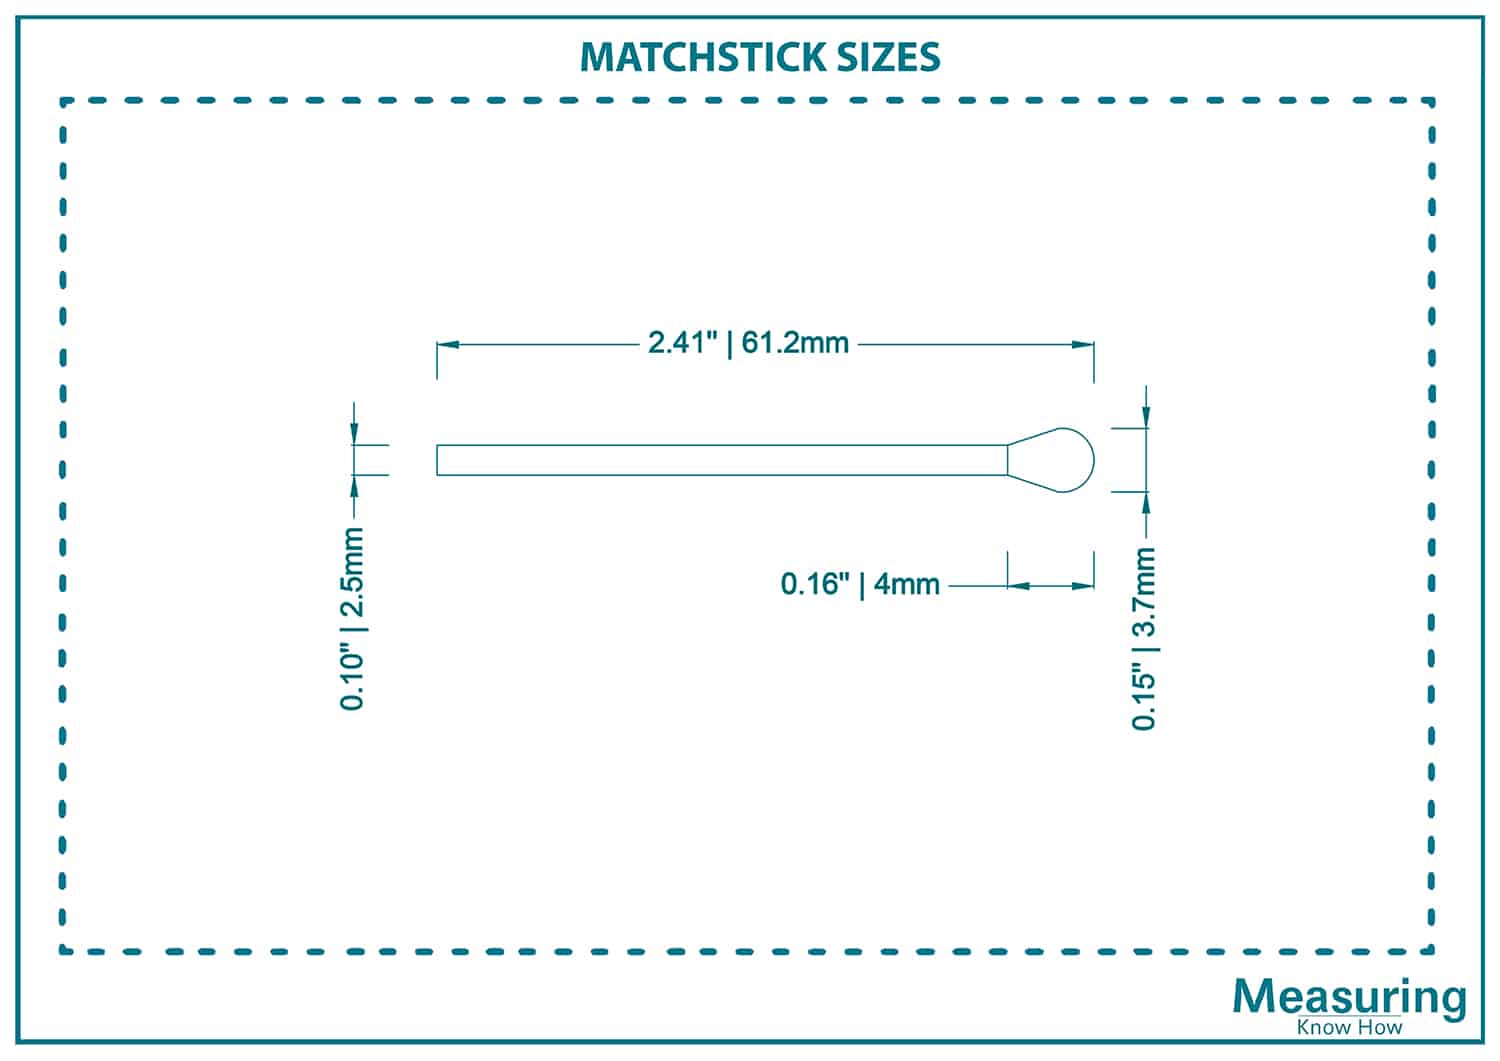 Diagram of Matchstick sizes